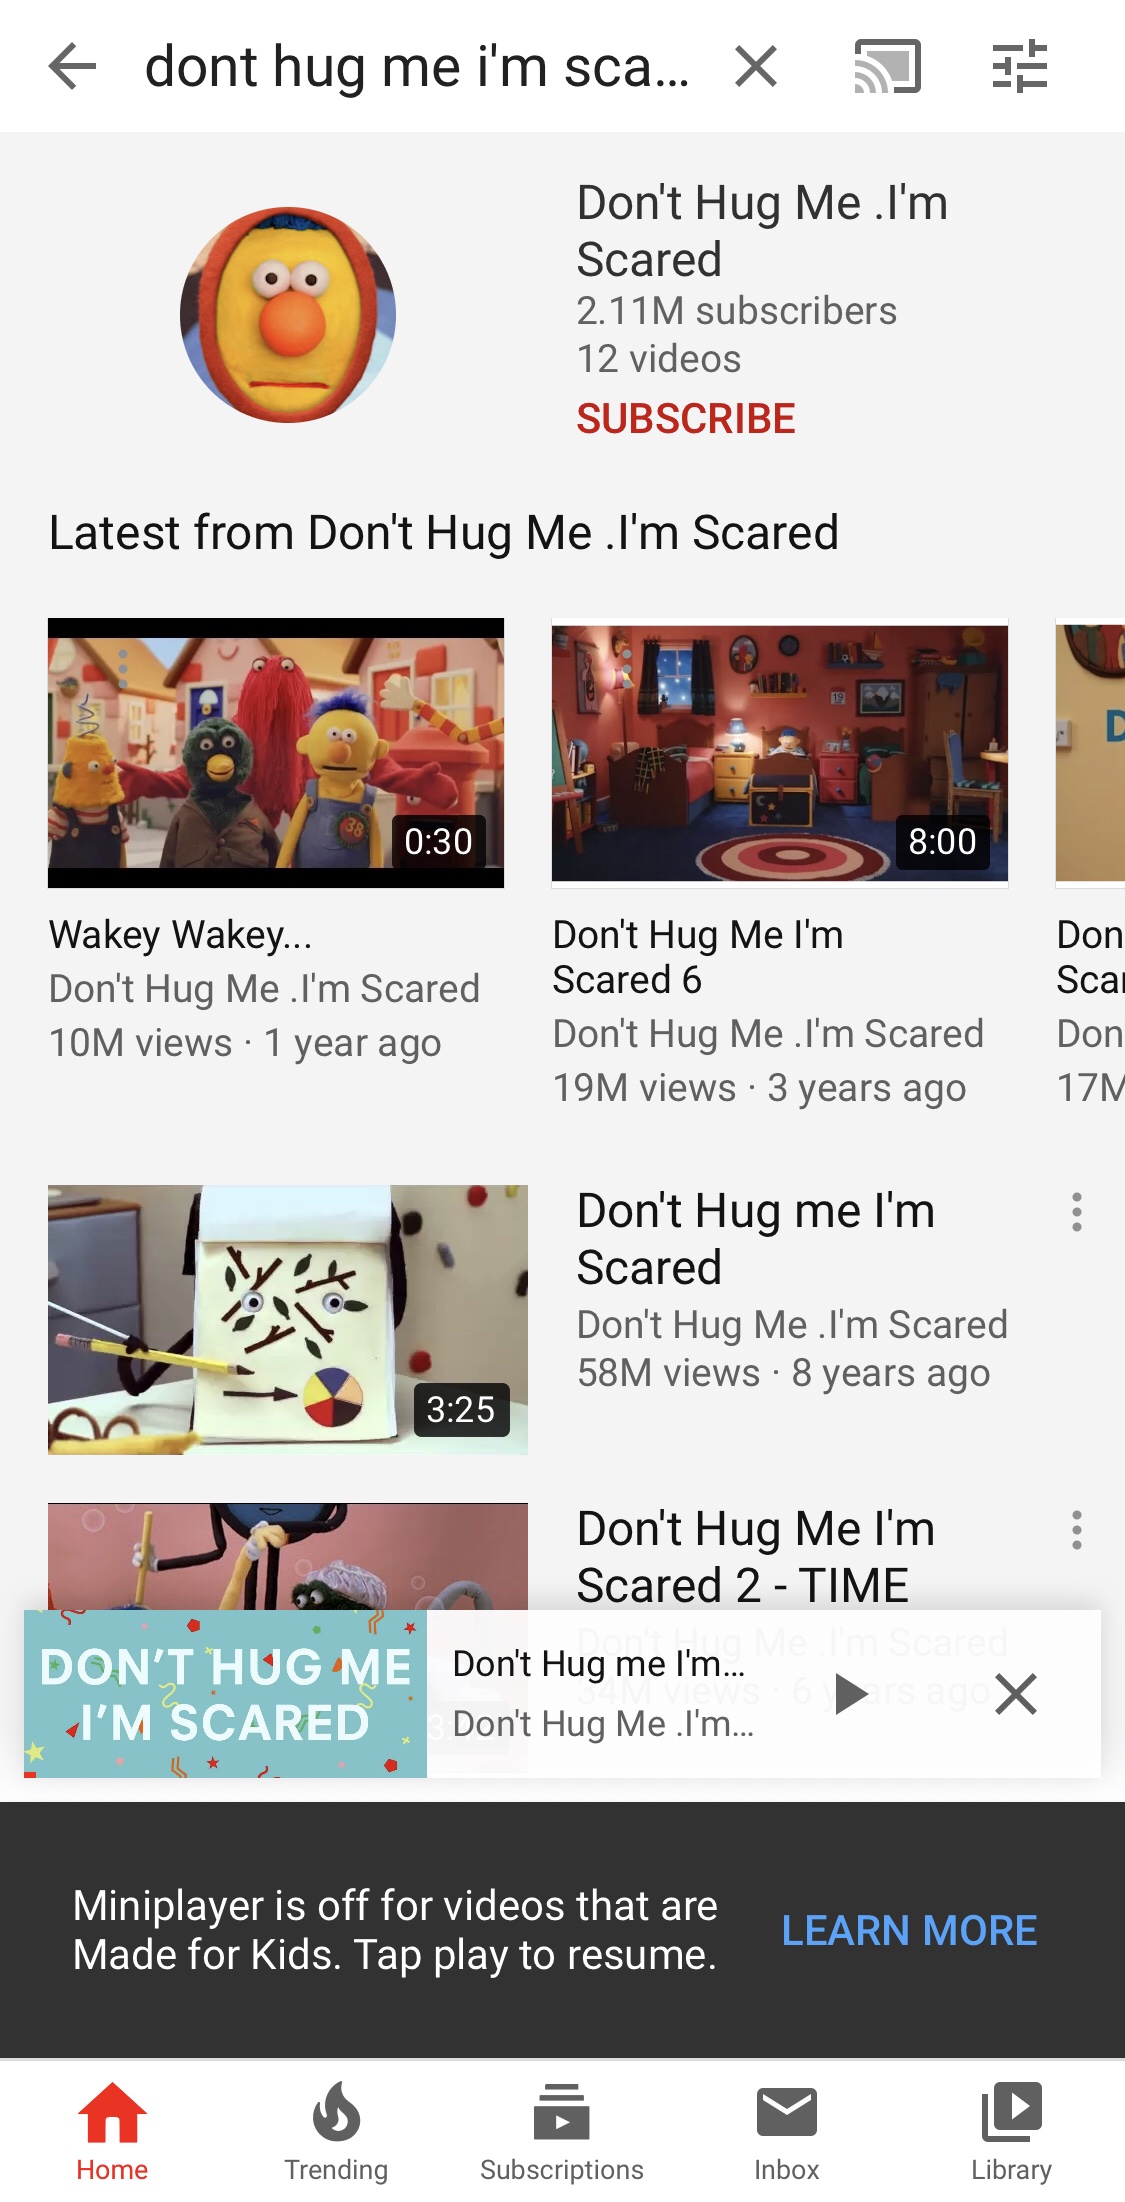 The miniplayer is blocked on YouTube videos that have been flagged as made for kids